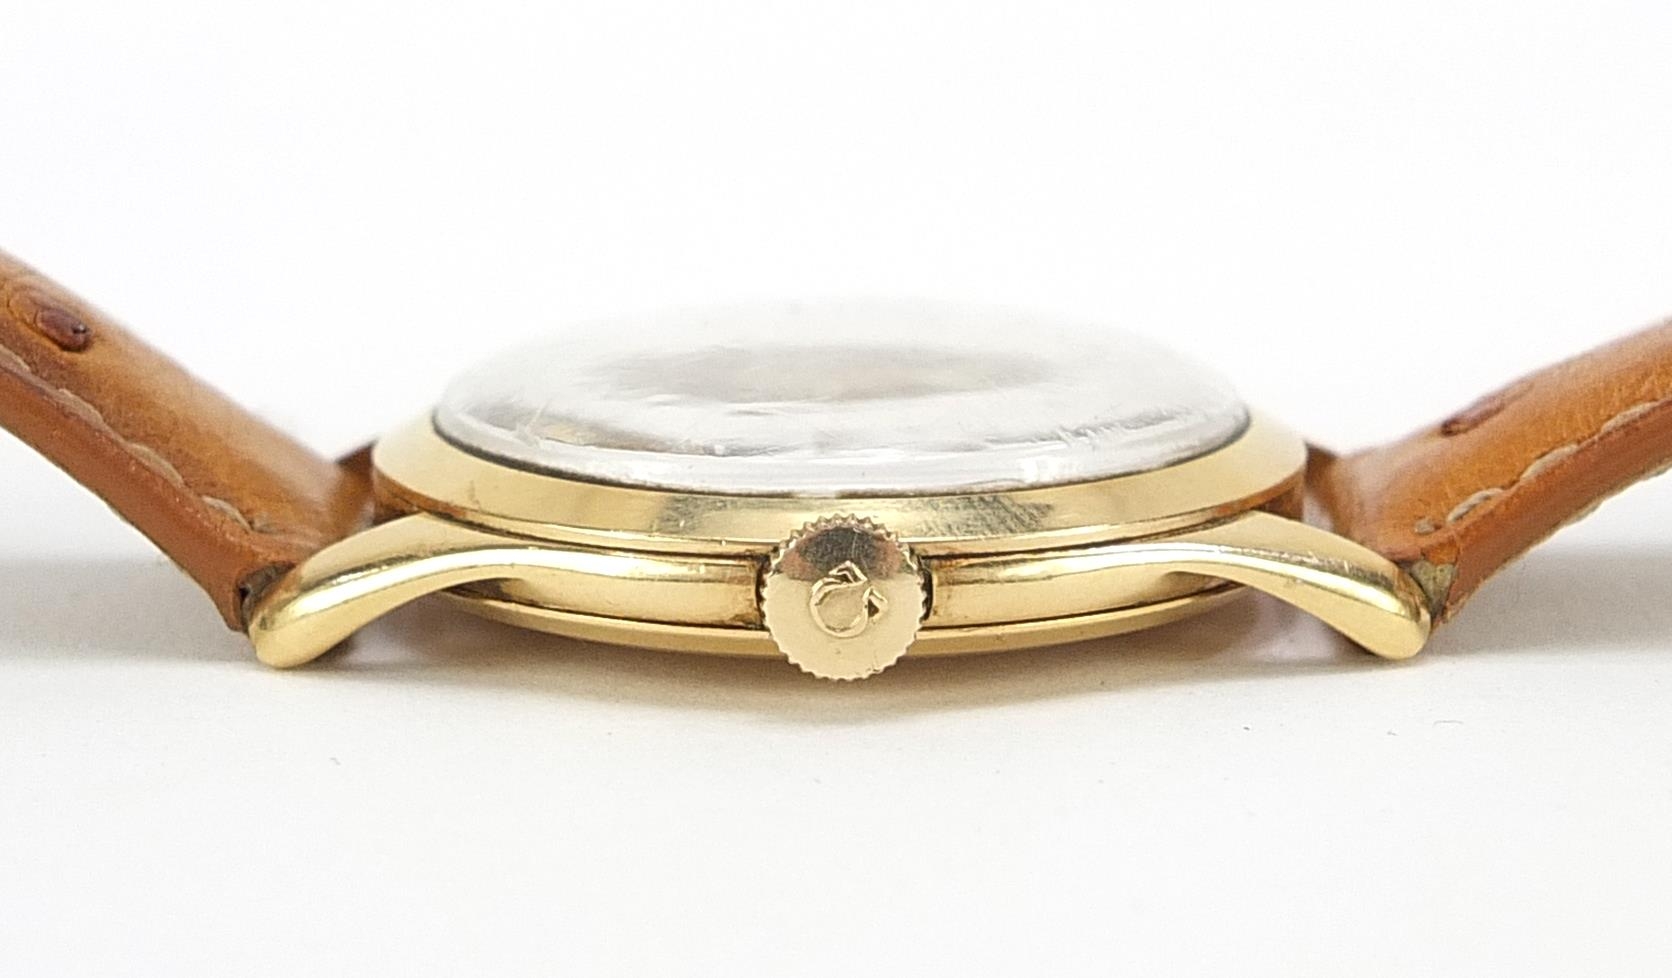 Omega, gentlemen's 18ct gold manual wind wristwatch with subsidiary dial, the movement numbered - Image 4 of 6